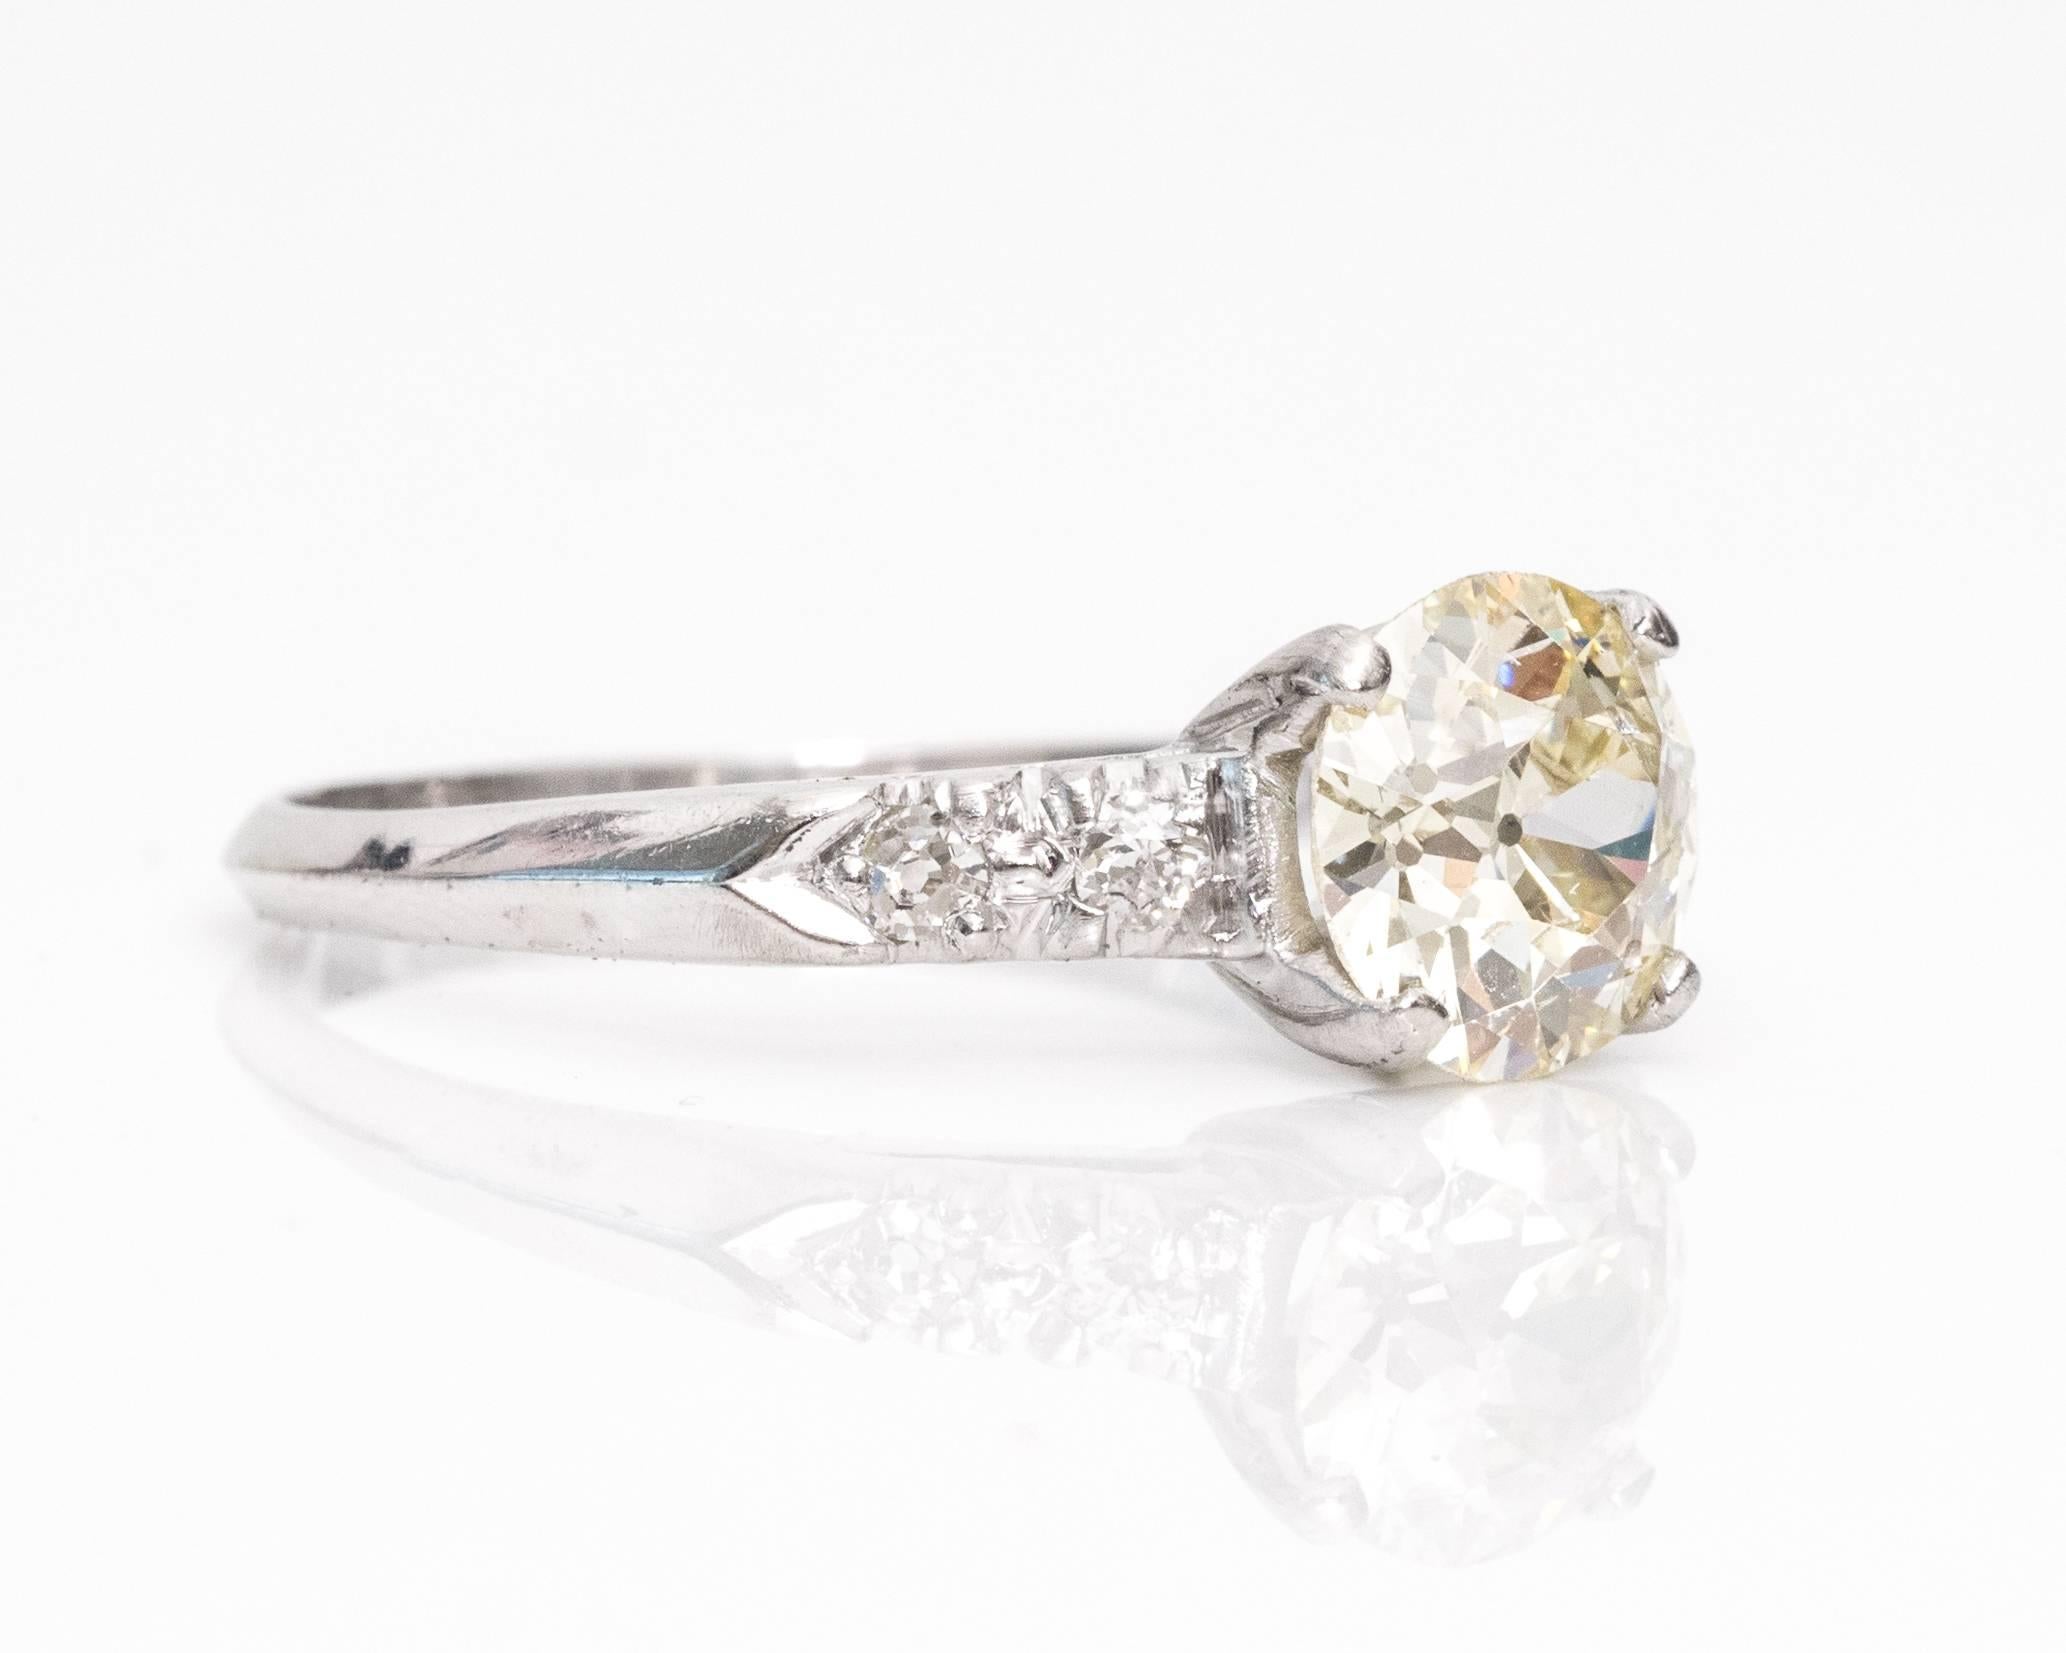 1925 Art Deco GIA Certified 1.19 Carat Diamond Platinum Engagement Ring. A stunning ring with a GIA certified center diamond! The center Old European cut stone is 1.19 carat with four Old Mine diamond accents totaling to .08carats. So much sparkle